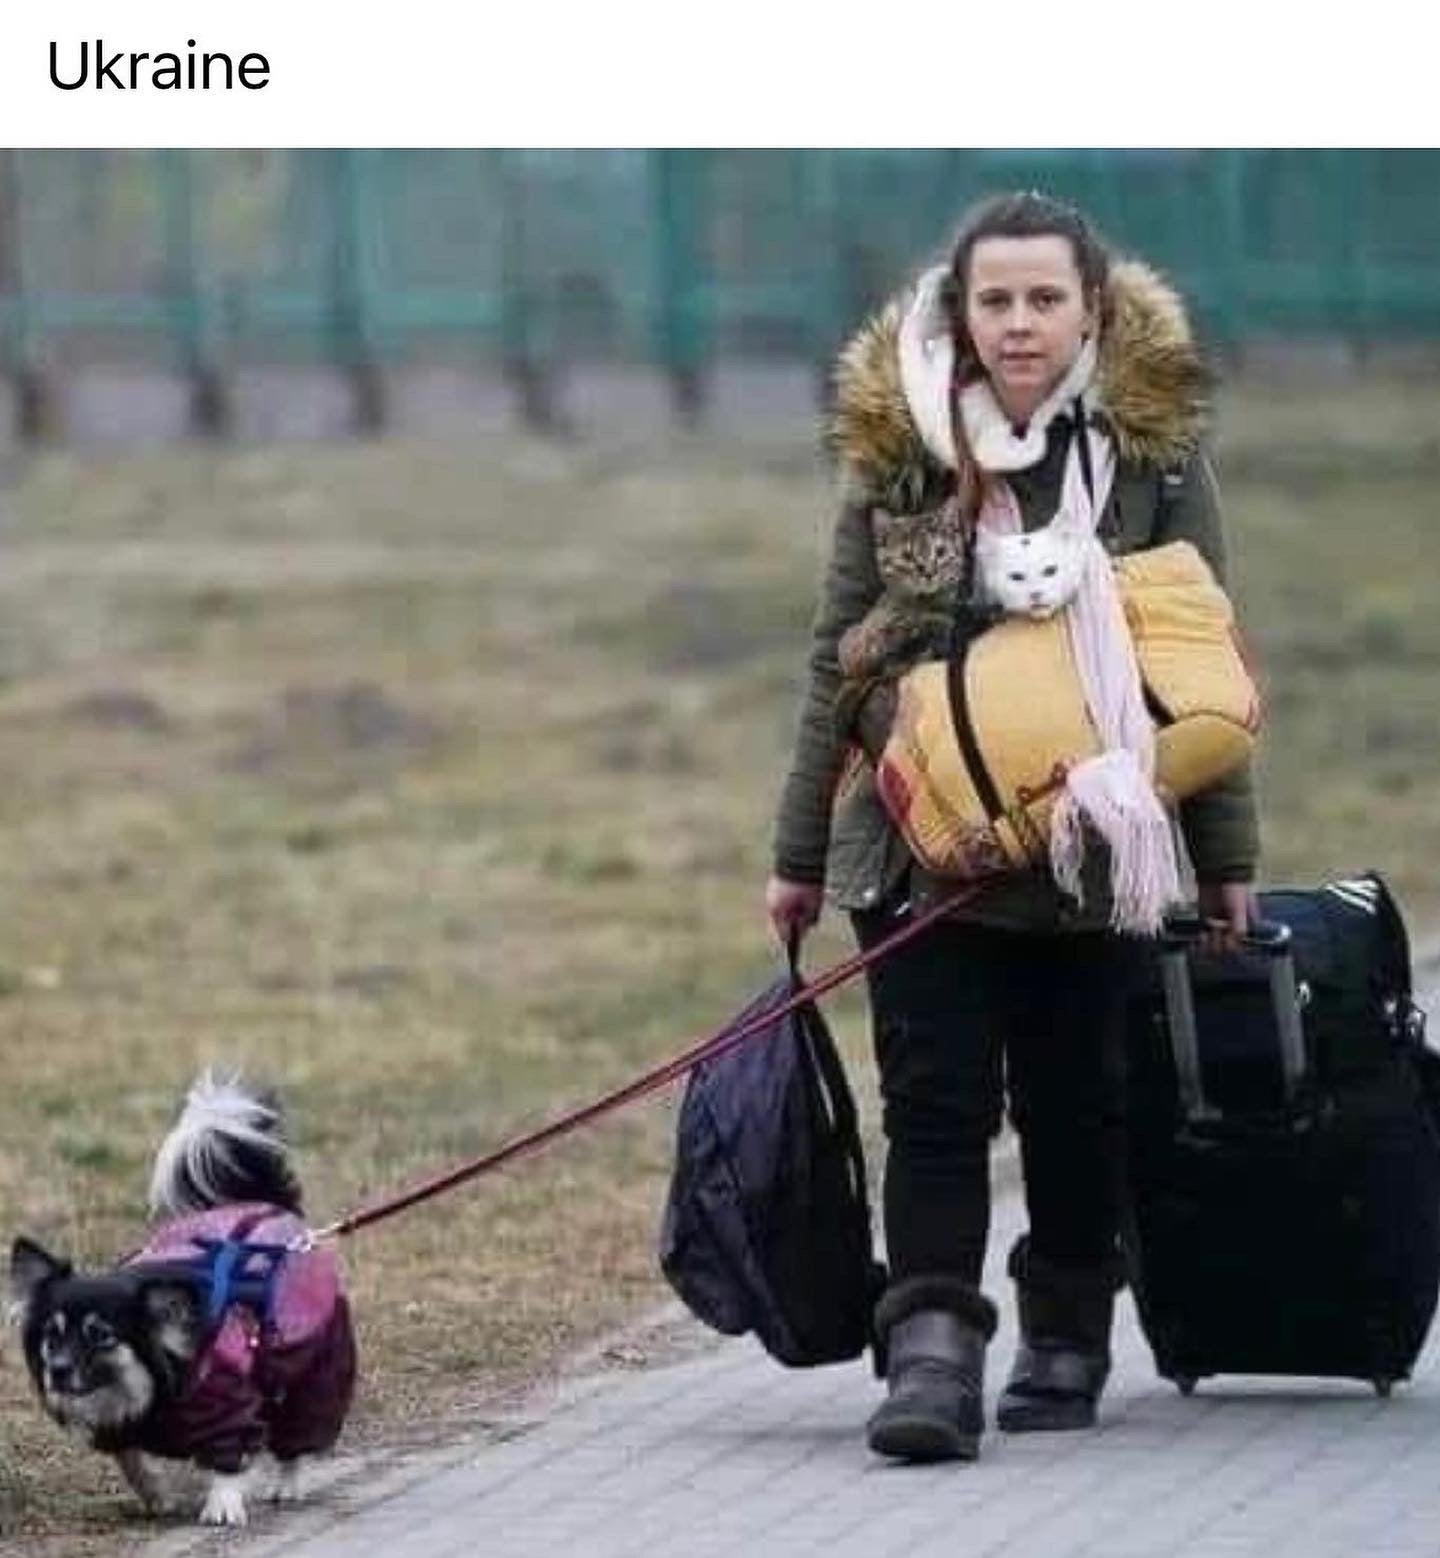 This Ukrainian woman on foot with pets says so much.